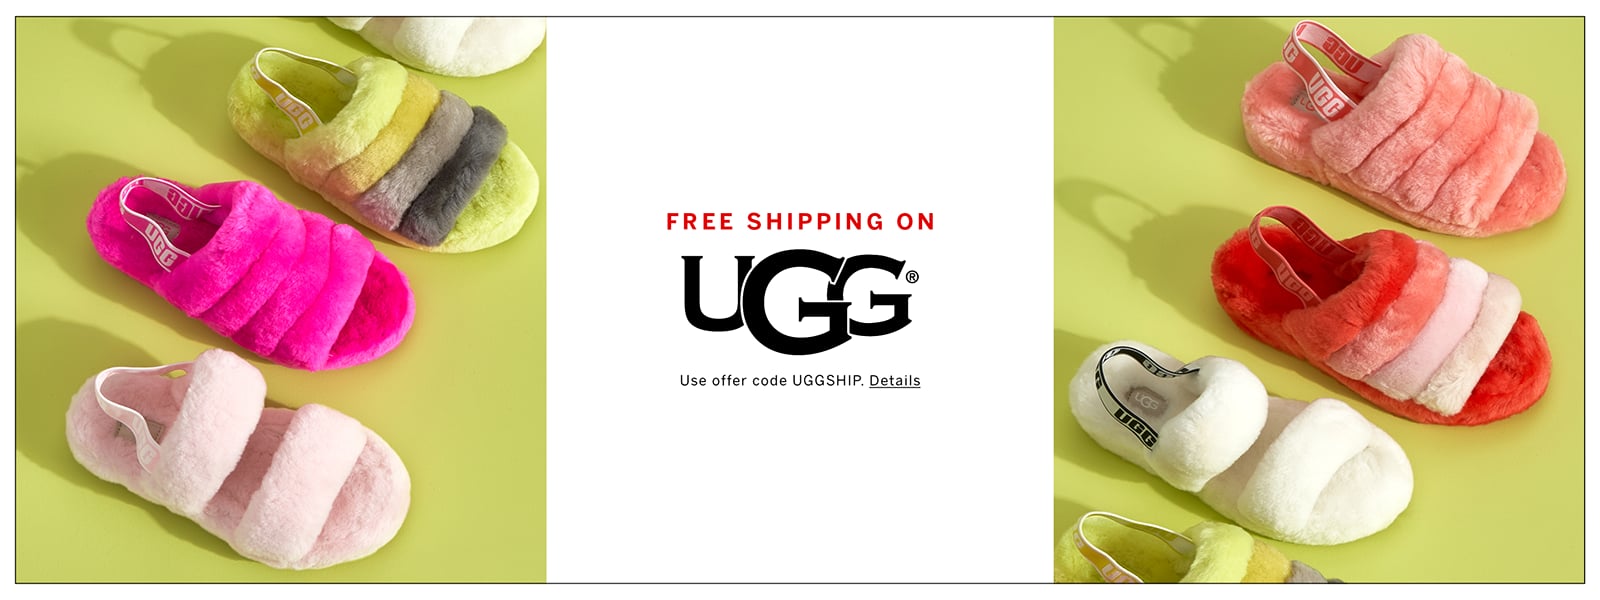 Free shipping on UGG. Use offer code UGGSHIP. Click for Details.